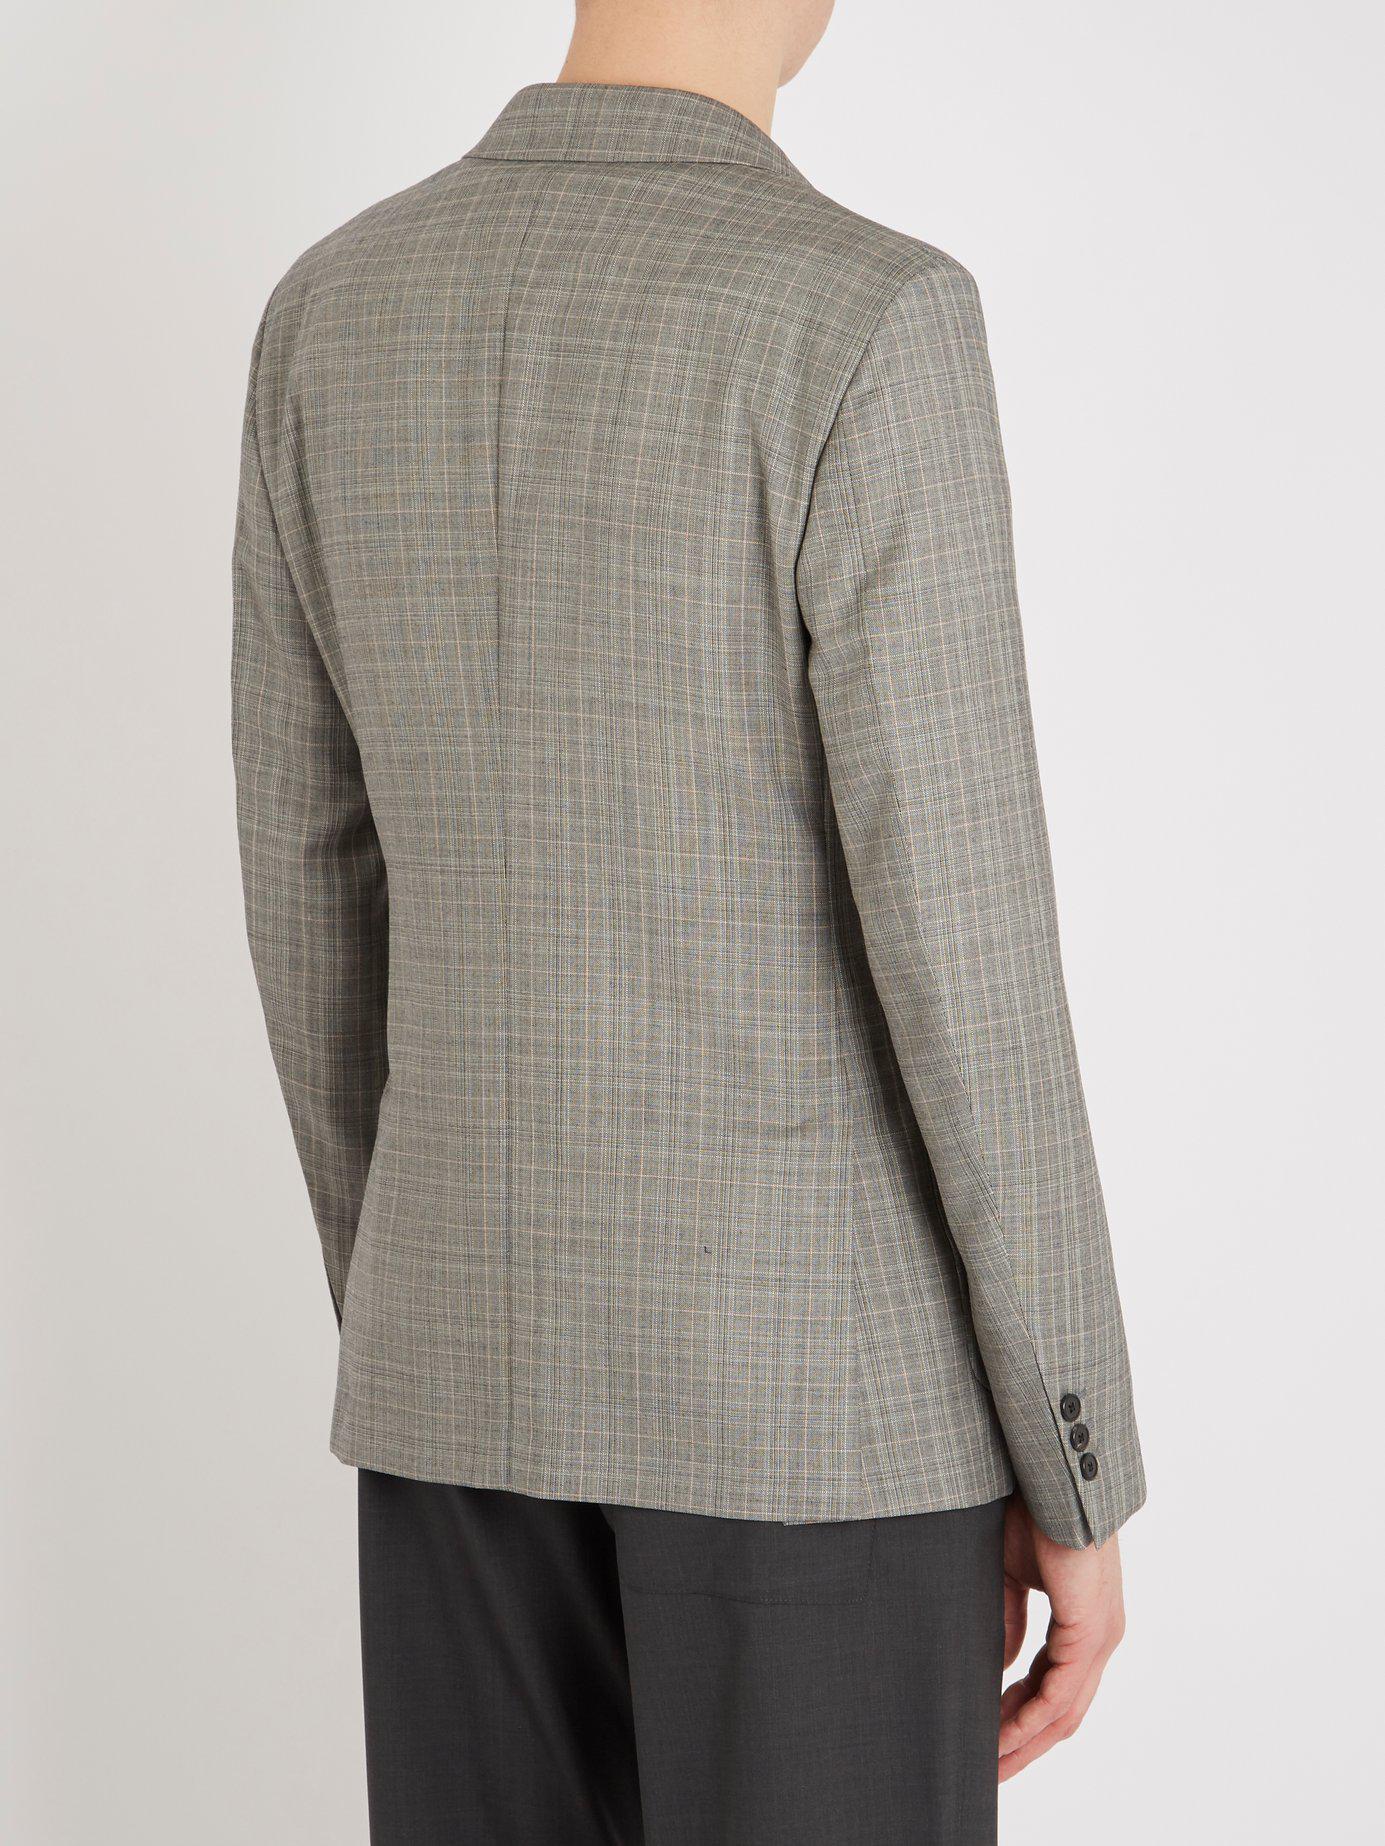 Prada Double Breasted Checked Wool Blend Blazer in Gray for Men - Lyst